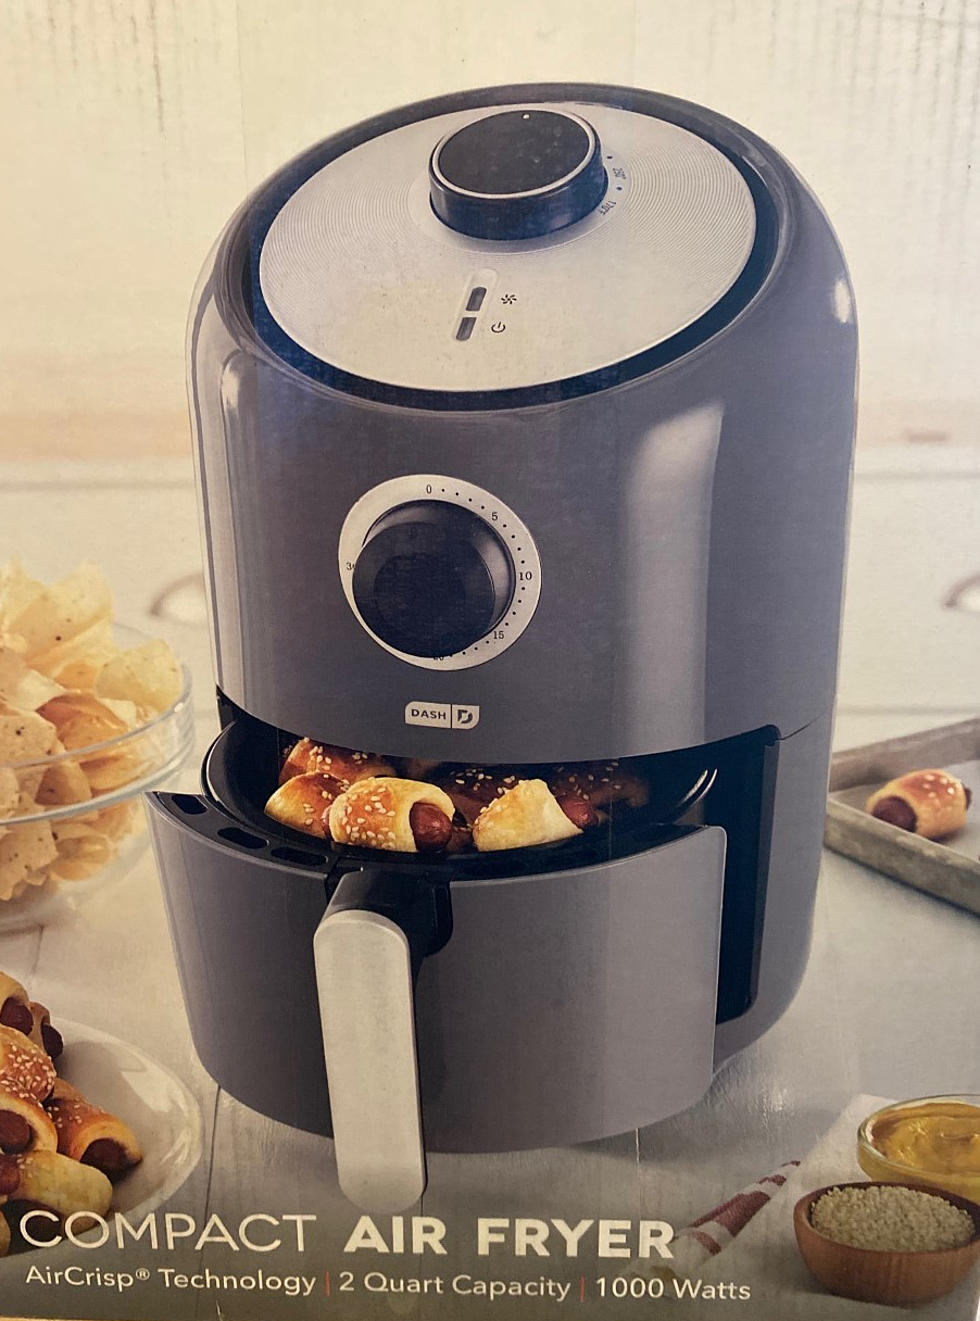 Finally Got an Air Fryer&#8230;What Do You Make in Yours?